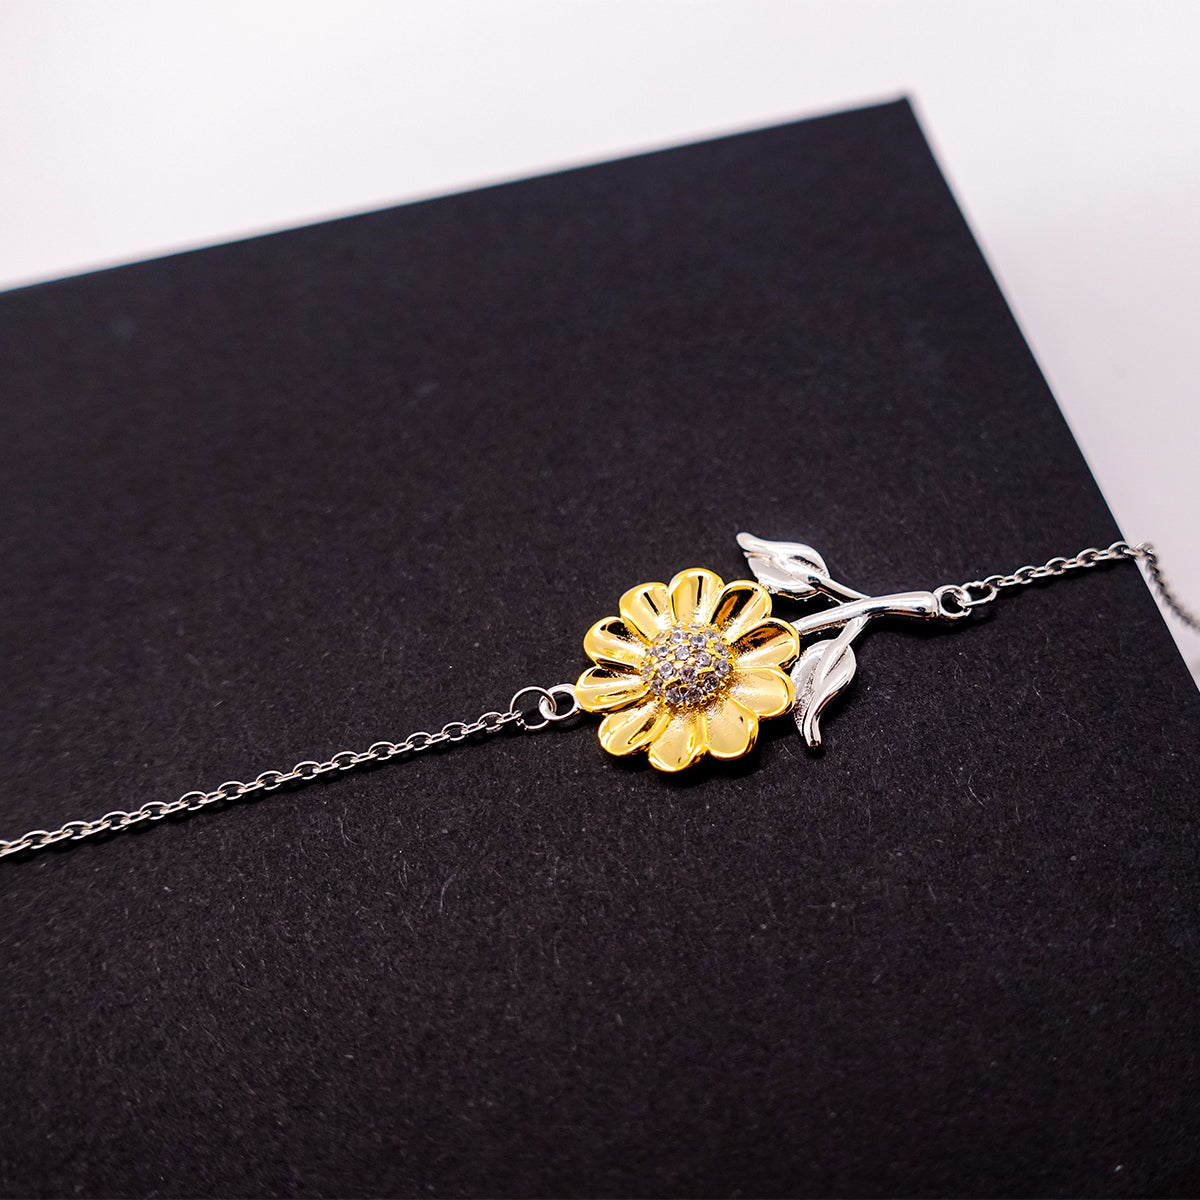 Sunflower Bracelet Auntie You Will Always Have a Special Place in My Heart Inspirational Jewelry Gift for Birthday Christmas Holidays